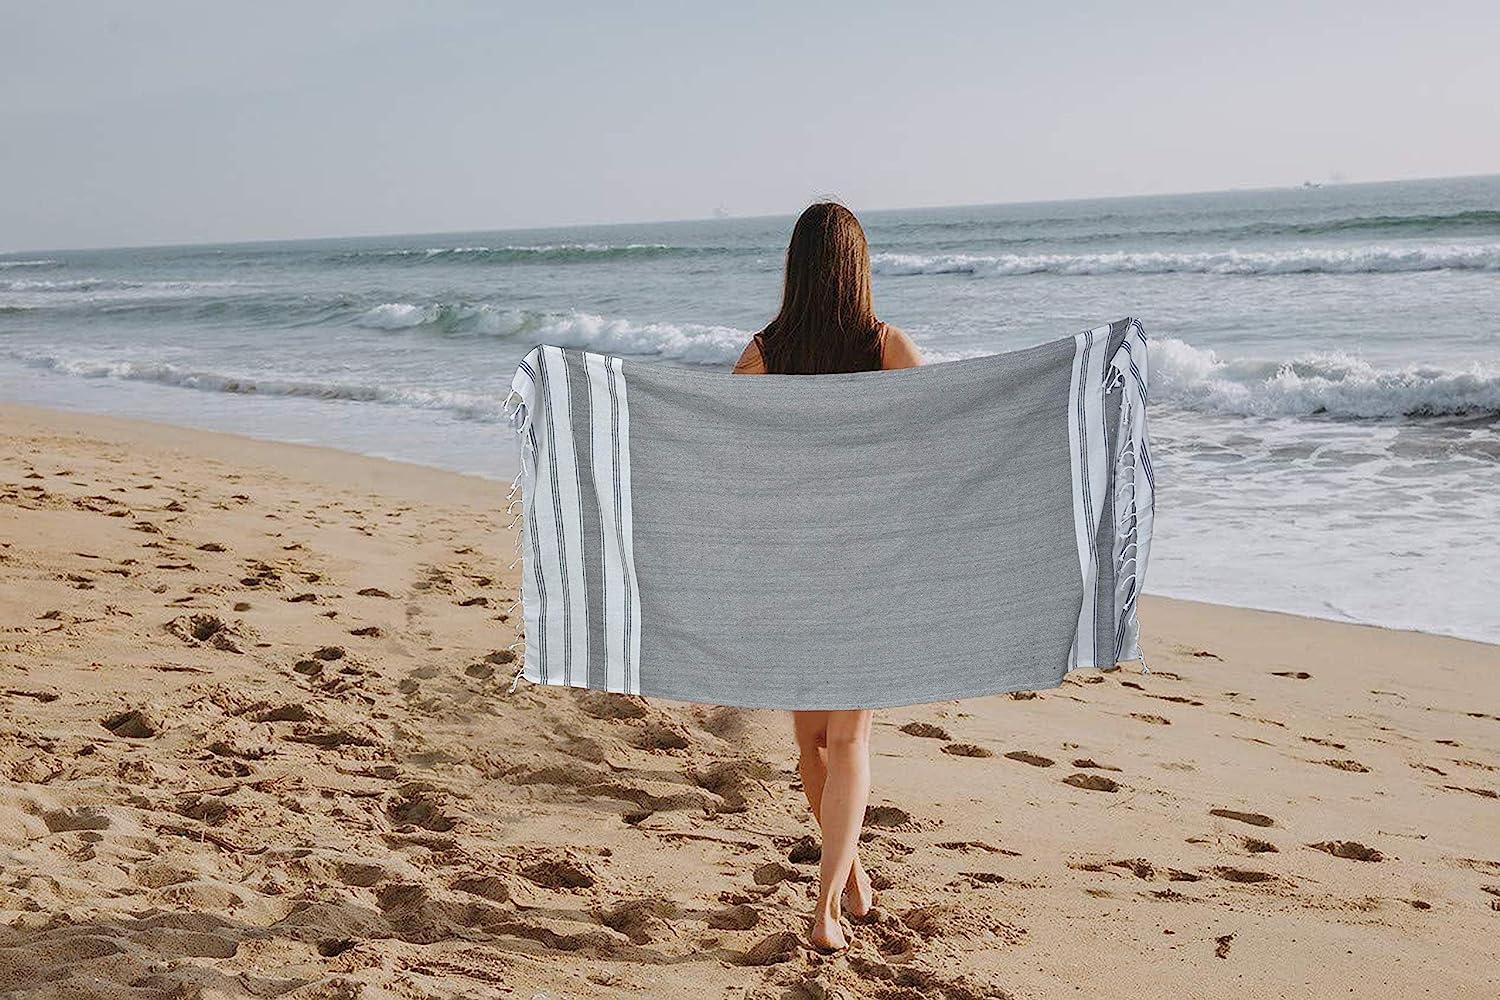 6 Packs Cotton Turkish Beach Towels Quick Dry Sand Free Soft